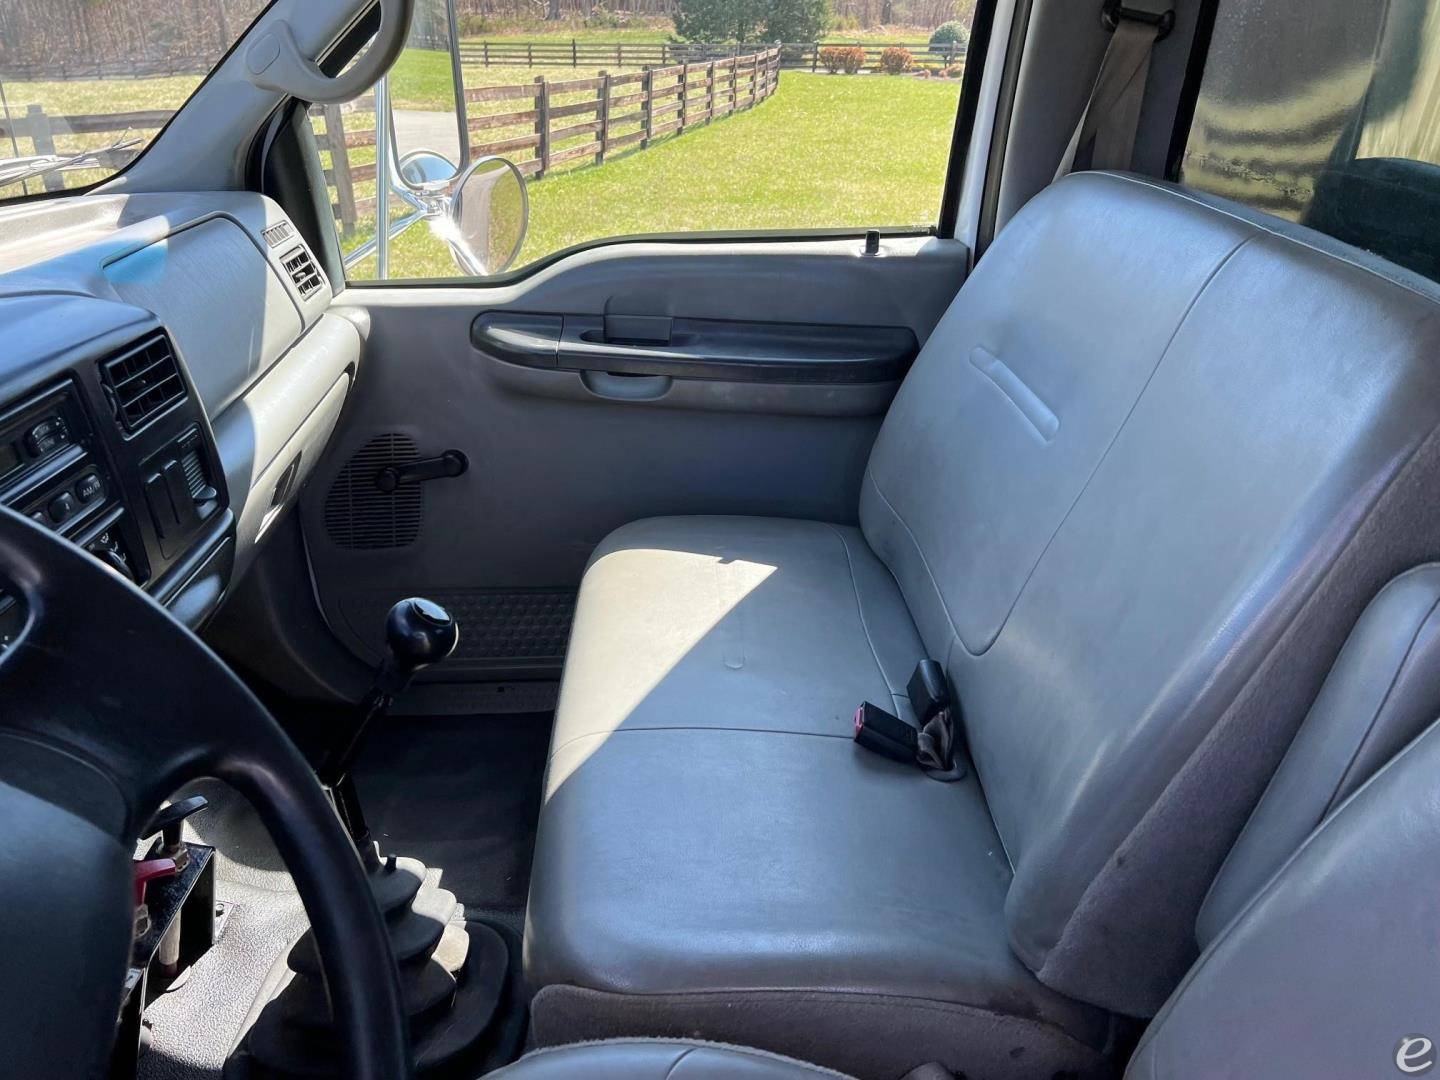 2007 Ford F750